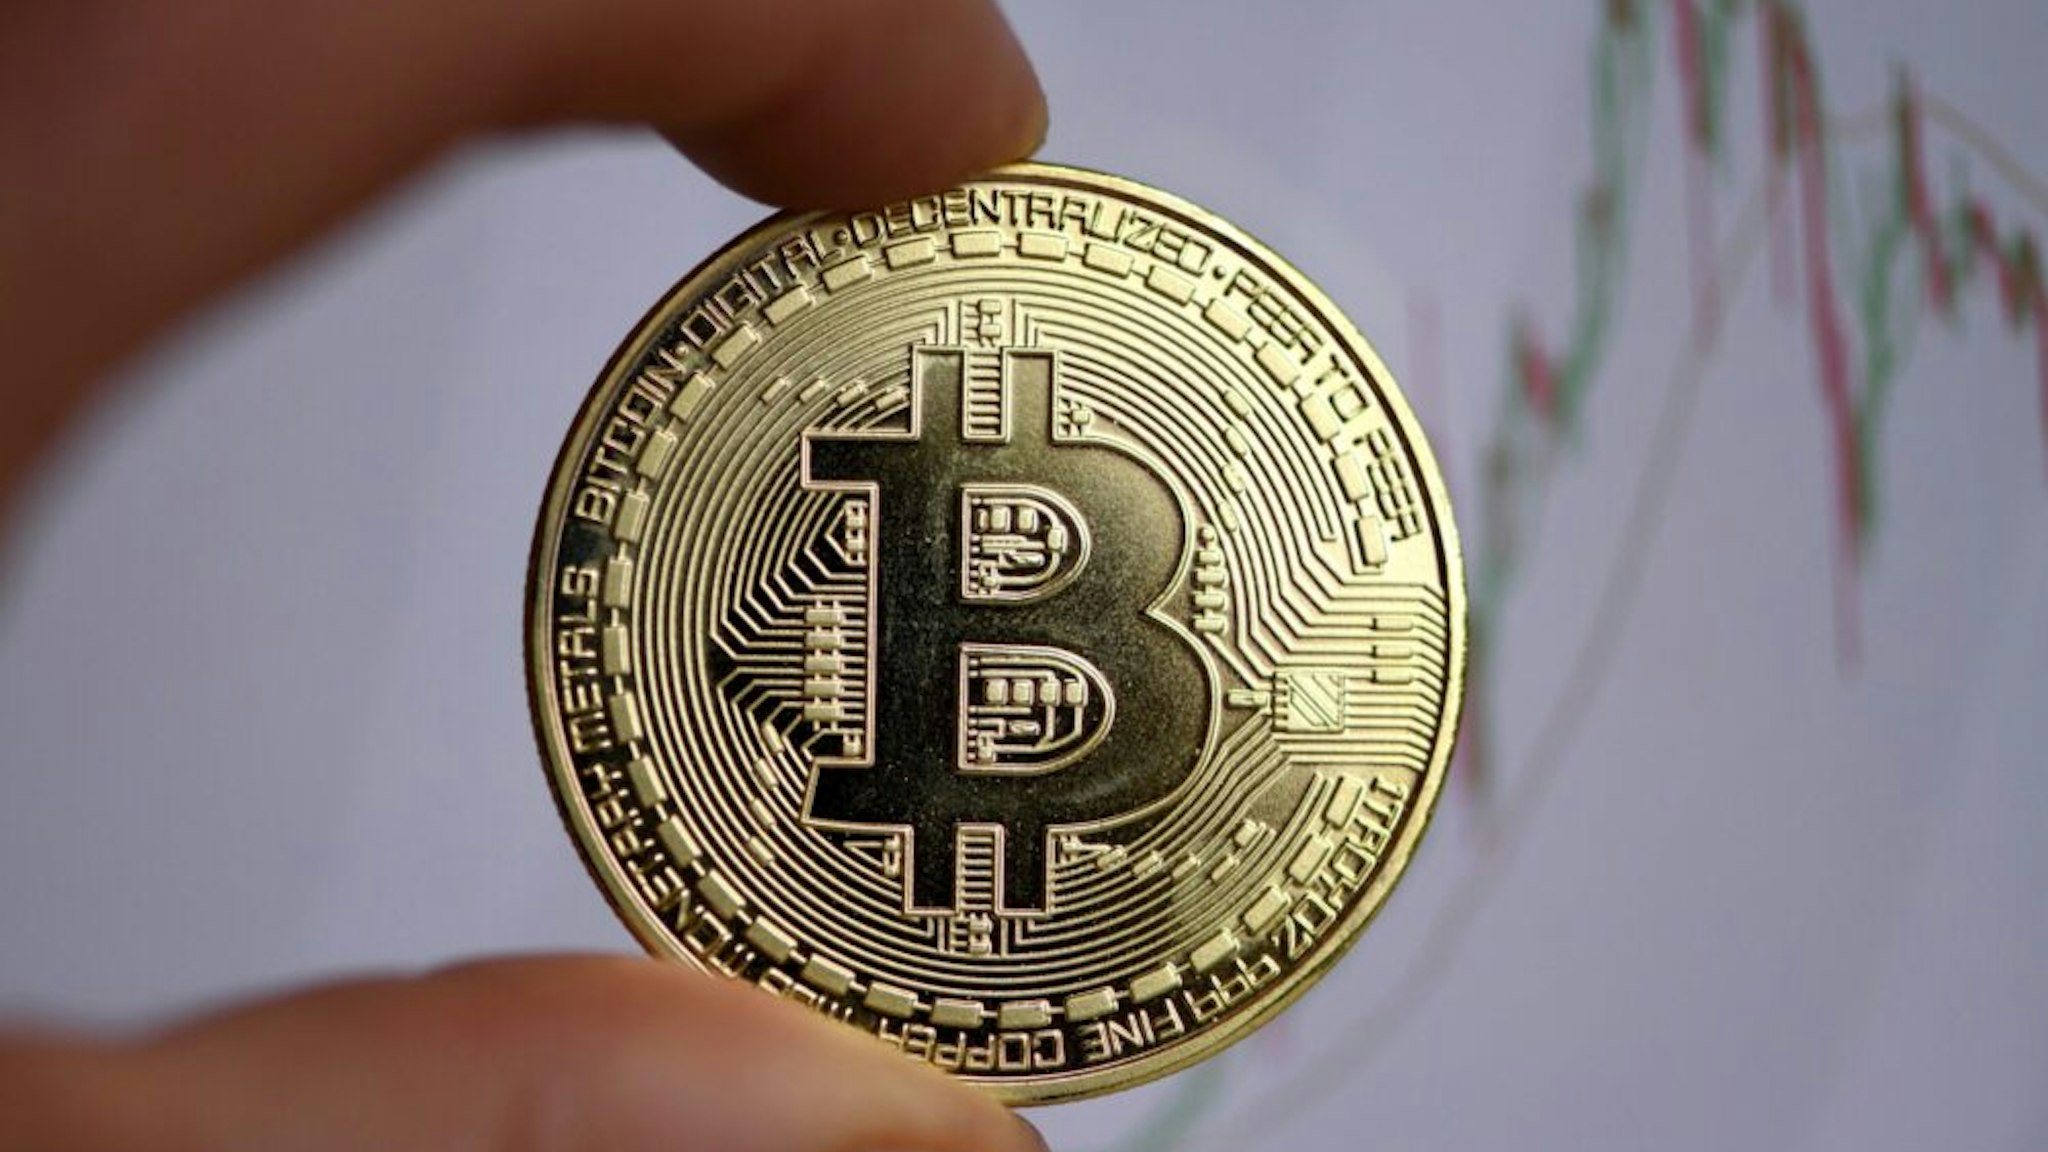 The photo shows a physical imitation of a Bitcoin in Dortmund, western Germany, on January 27, 2020.